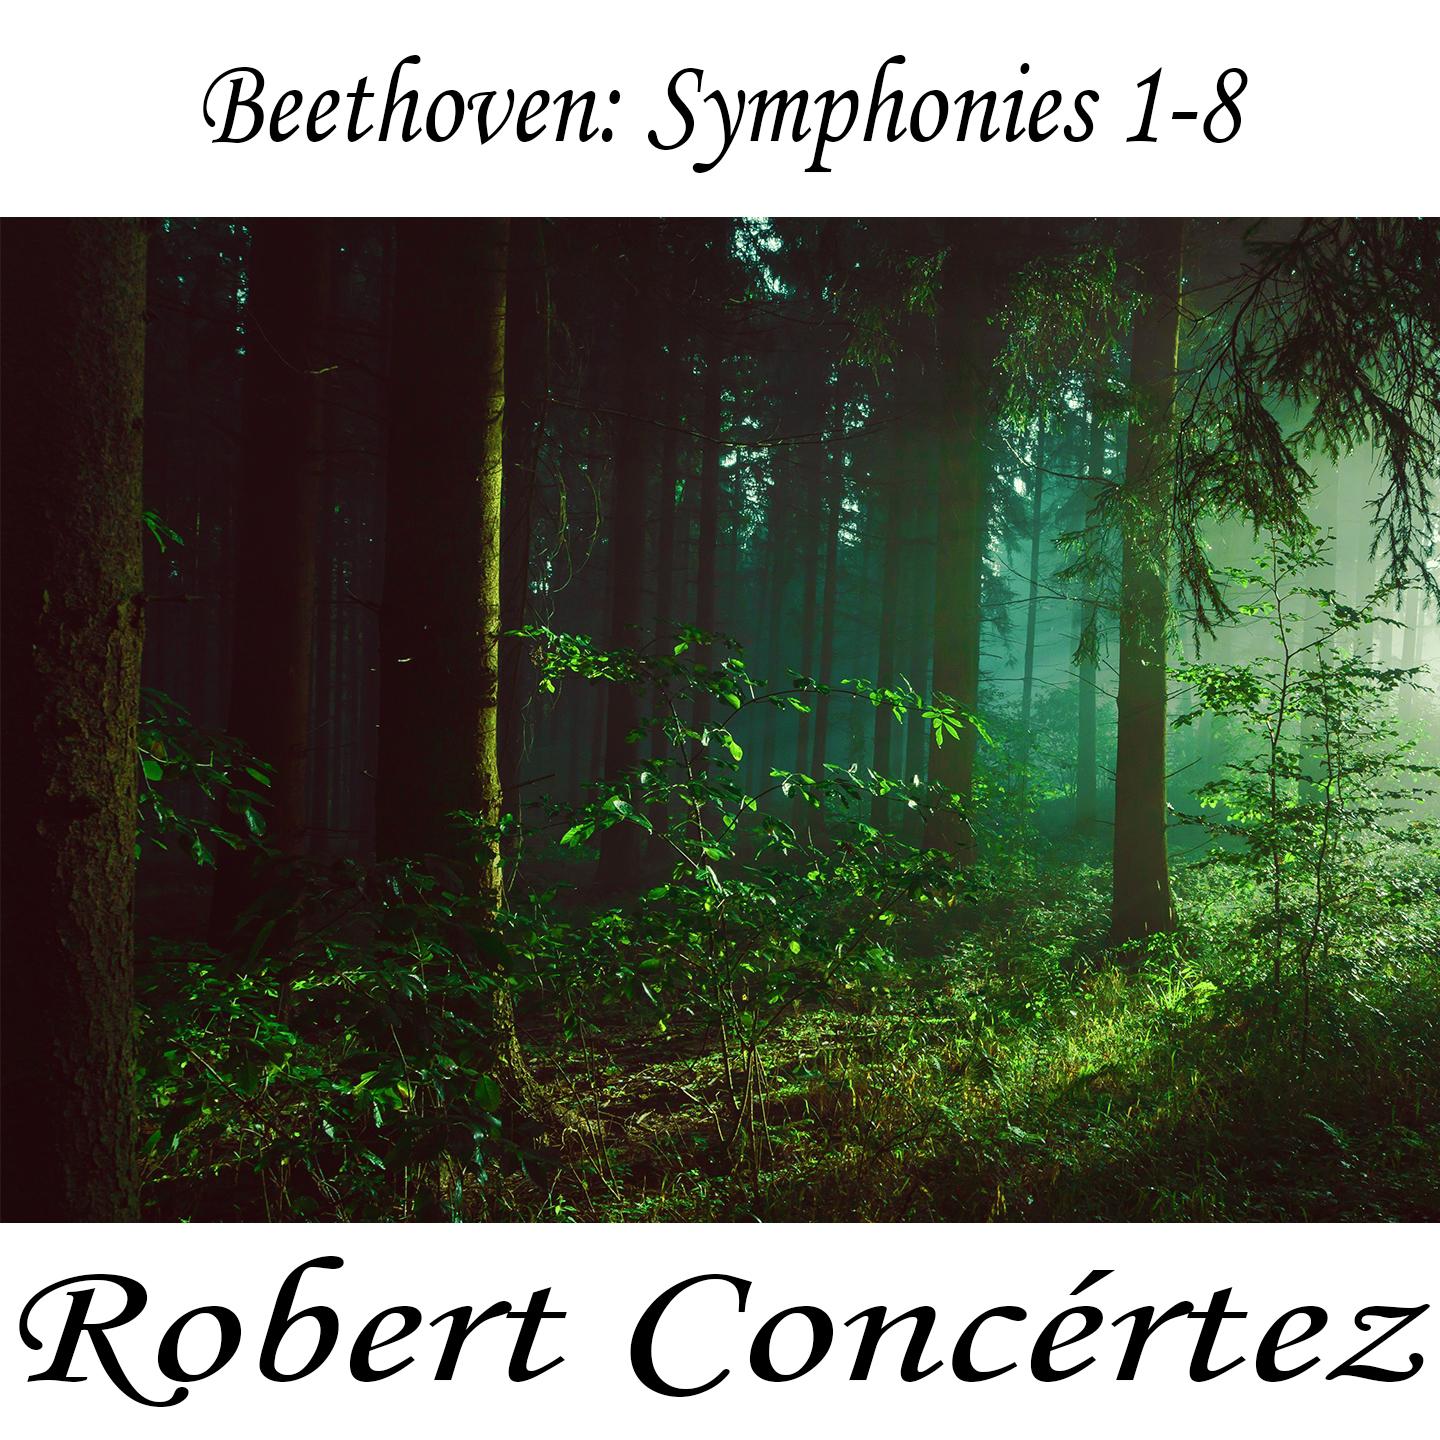 Beethoven: Symphony No- 6 in F Major, Op- 68 Pastorale II- Scene at the Brook- Andante molto mosso